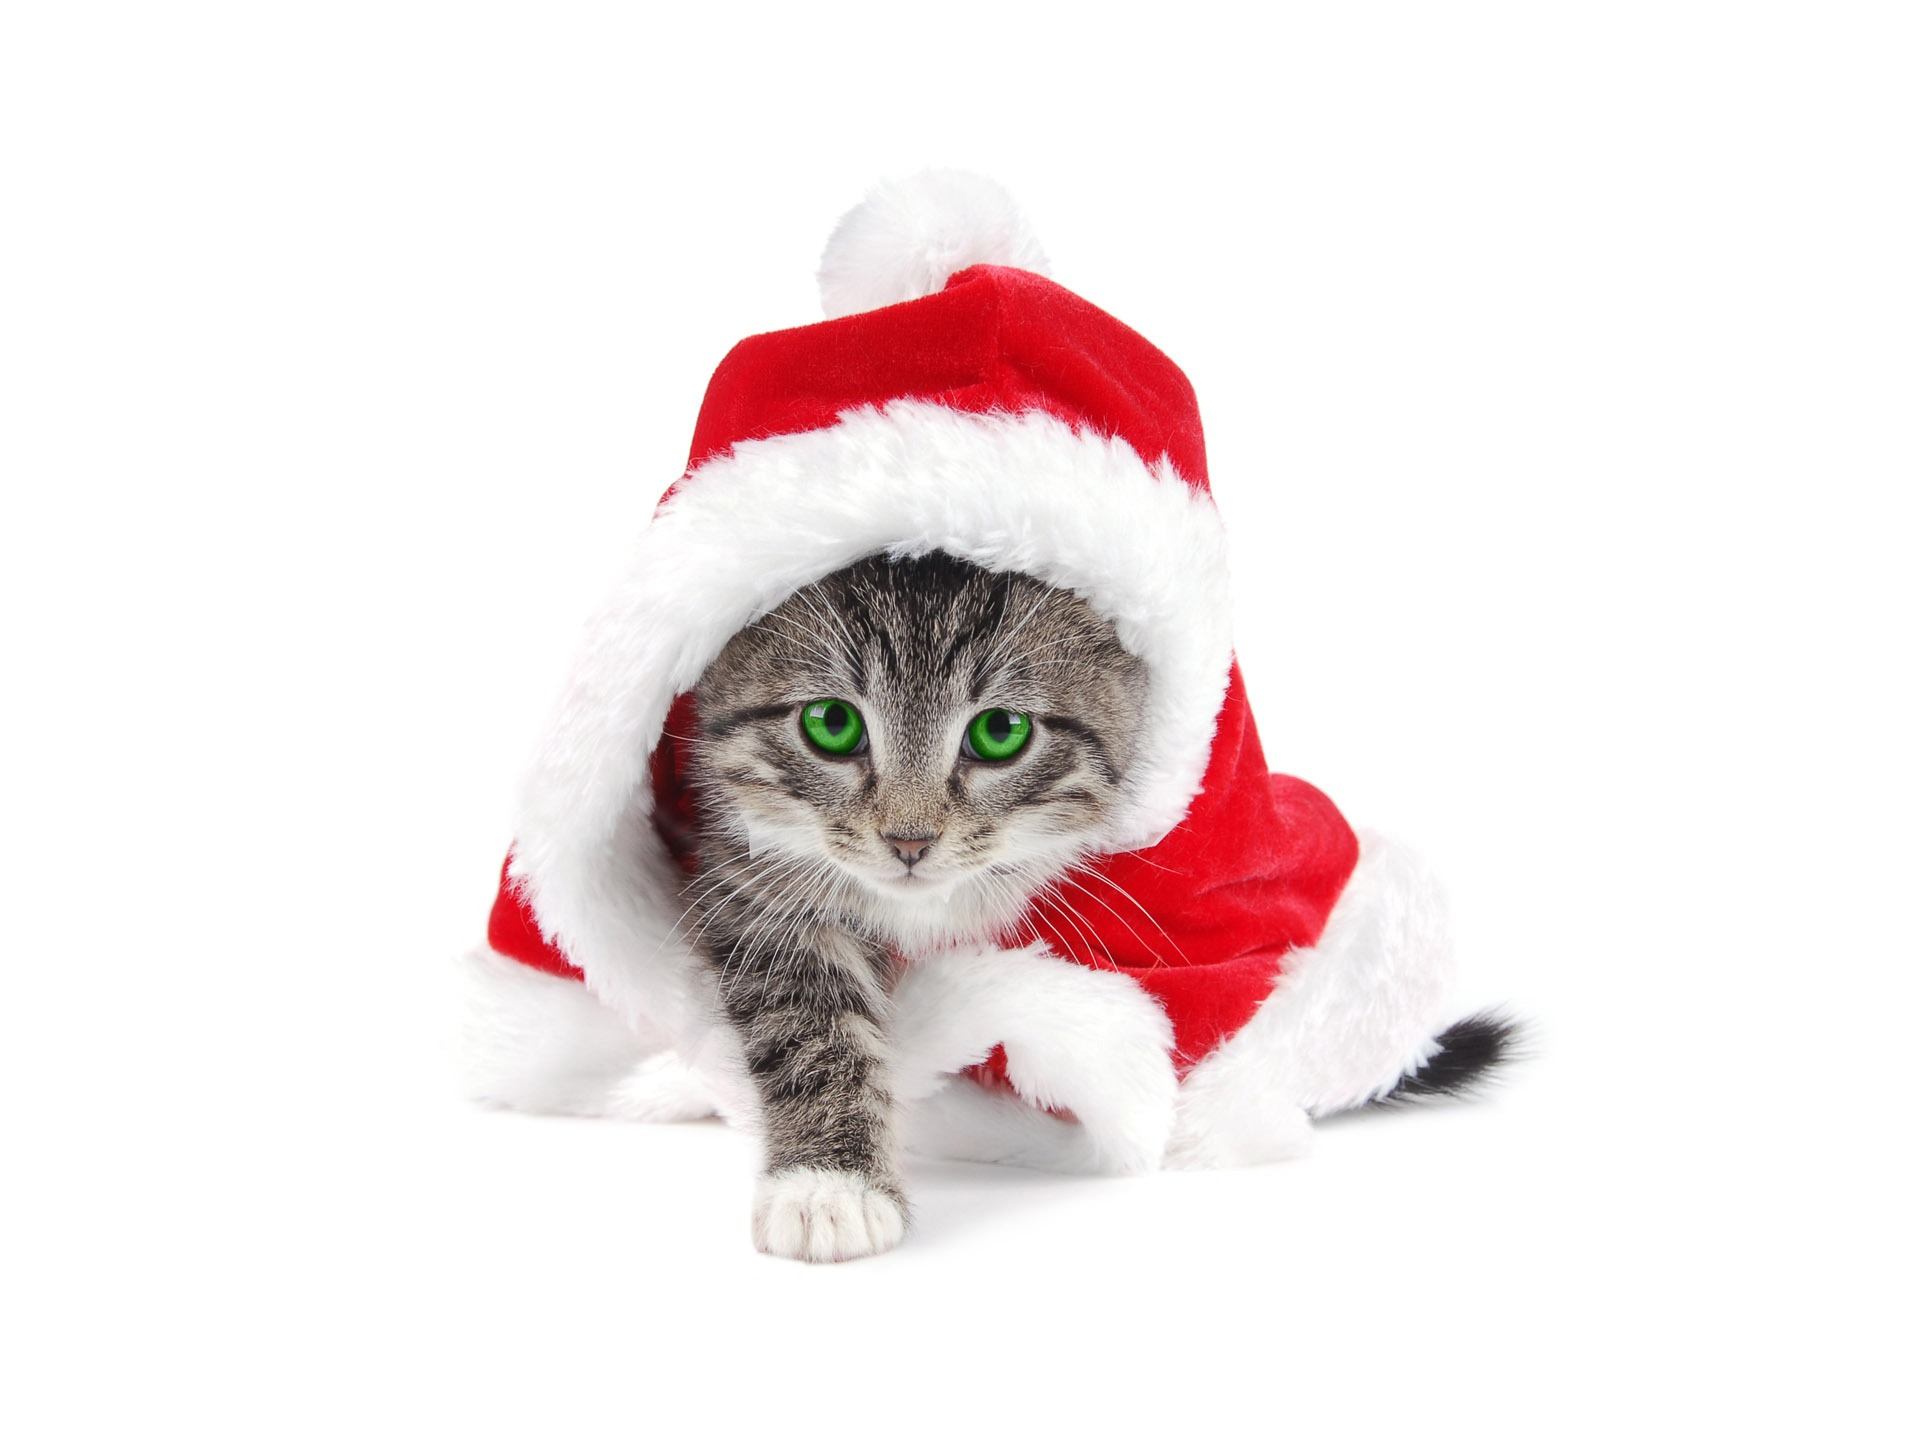 Mesmerizing Santa Claus Wallpapers - Kittens Dressed Up For Christmas - HD Wallpaper 